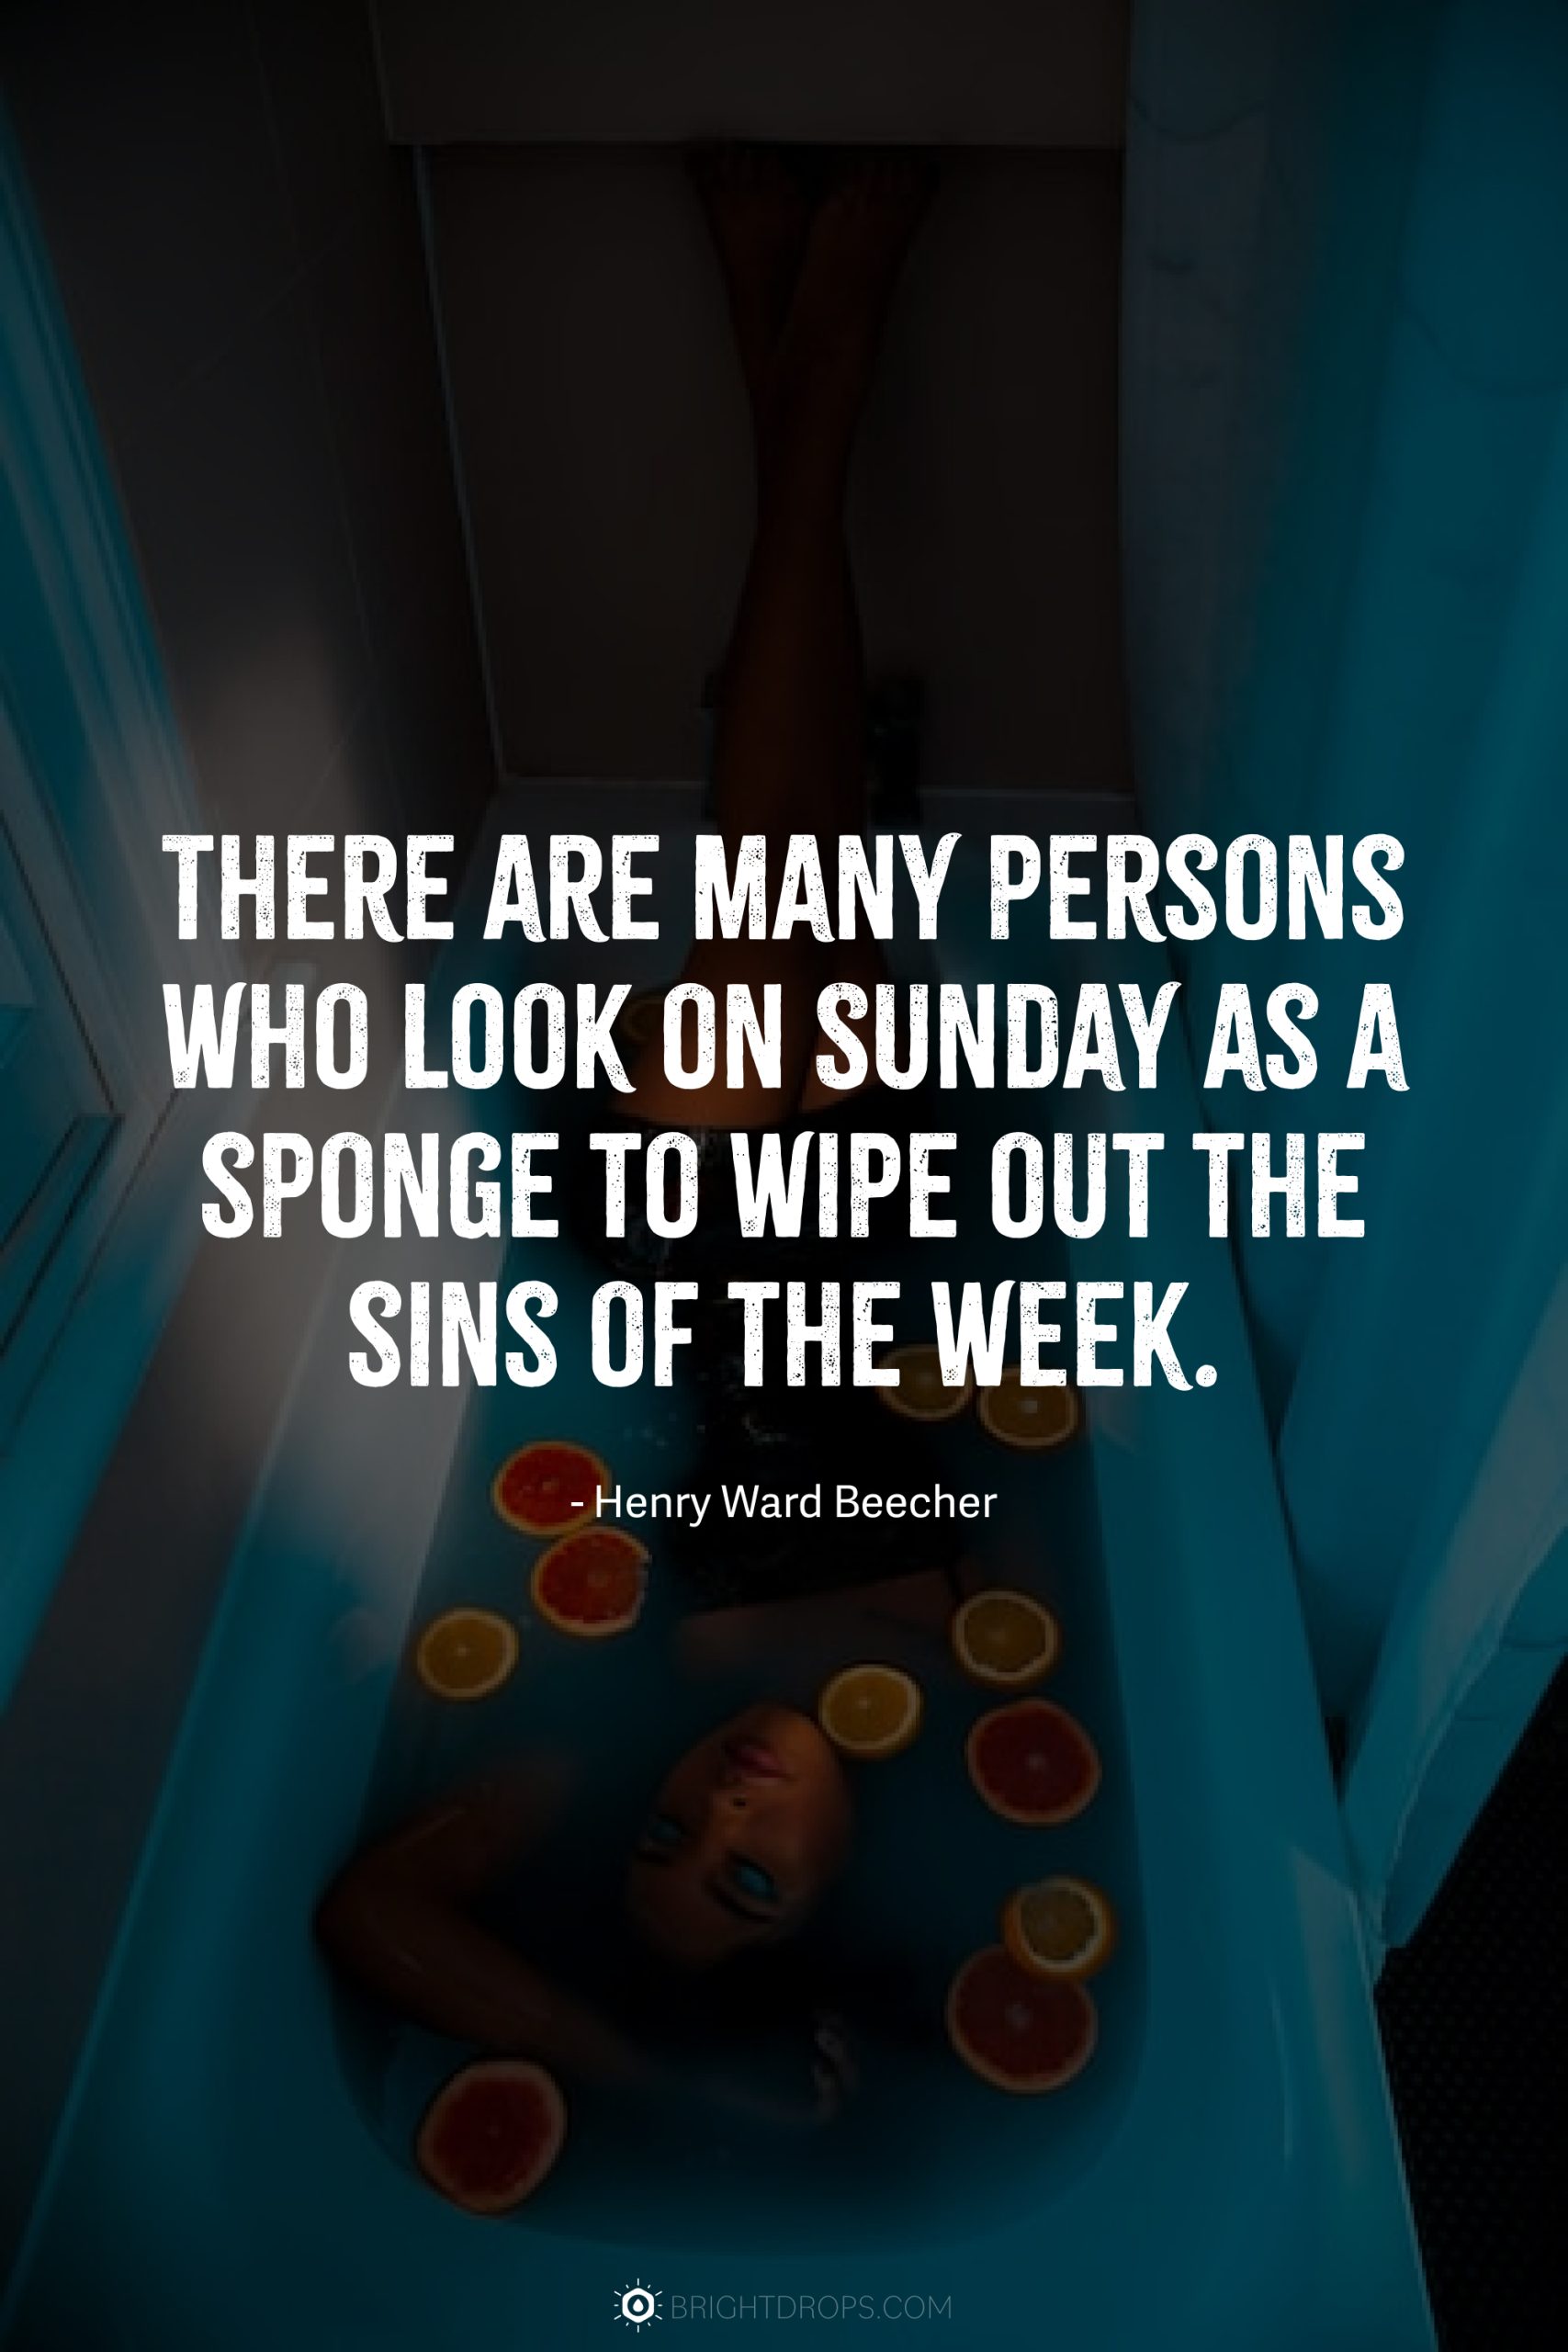 There are many persons who look on Sunday as a sponge to wipe out the sins of the week.